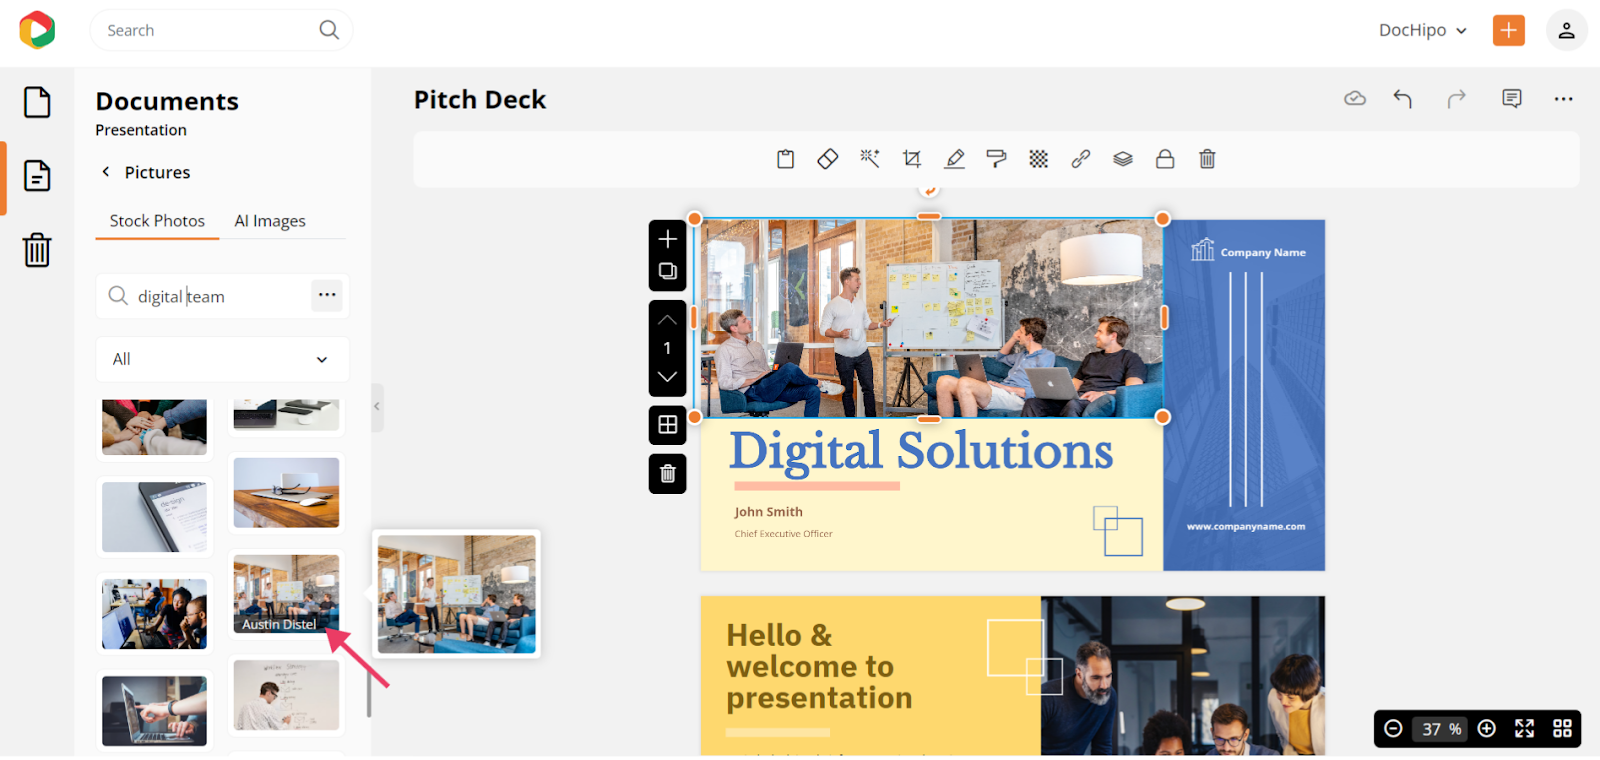 Pitch deck template and Stock images from DocHipo